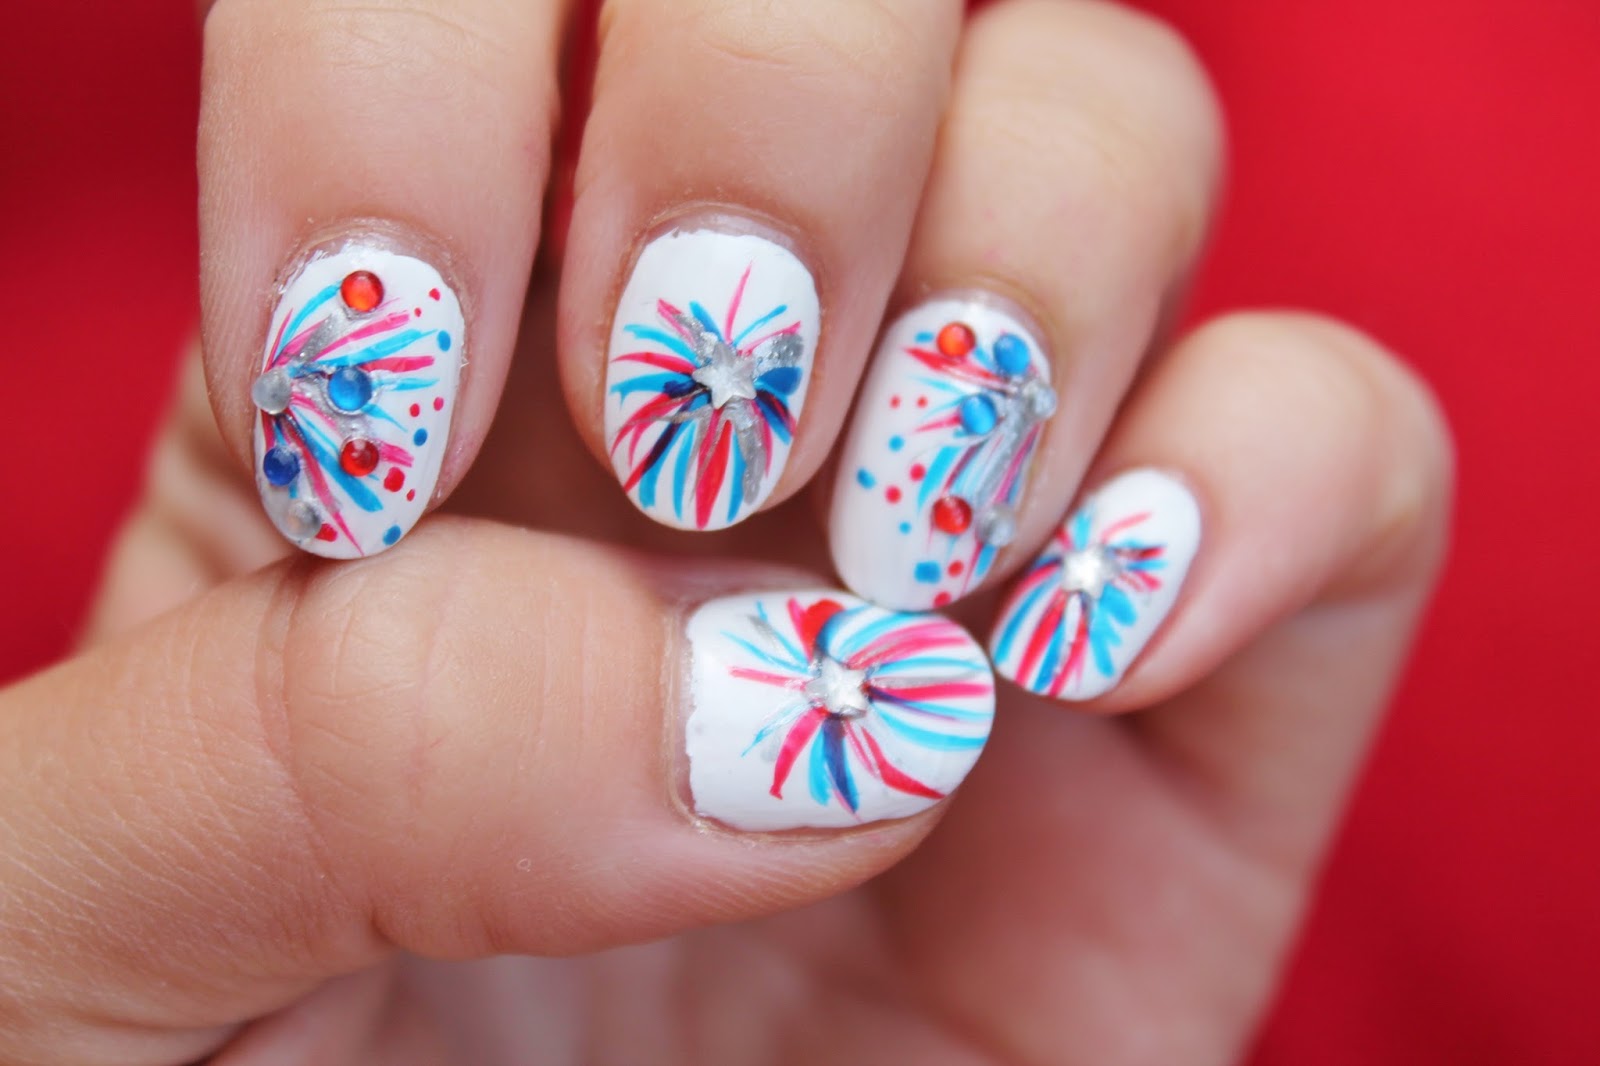 Patriotic Nail Art for Military Ball - wide 7